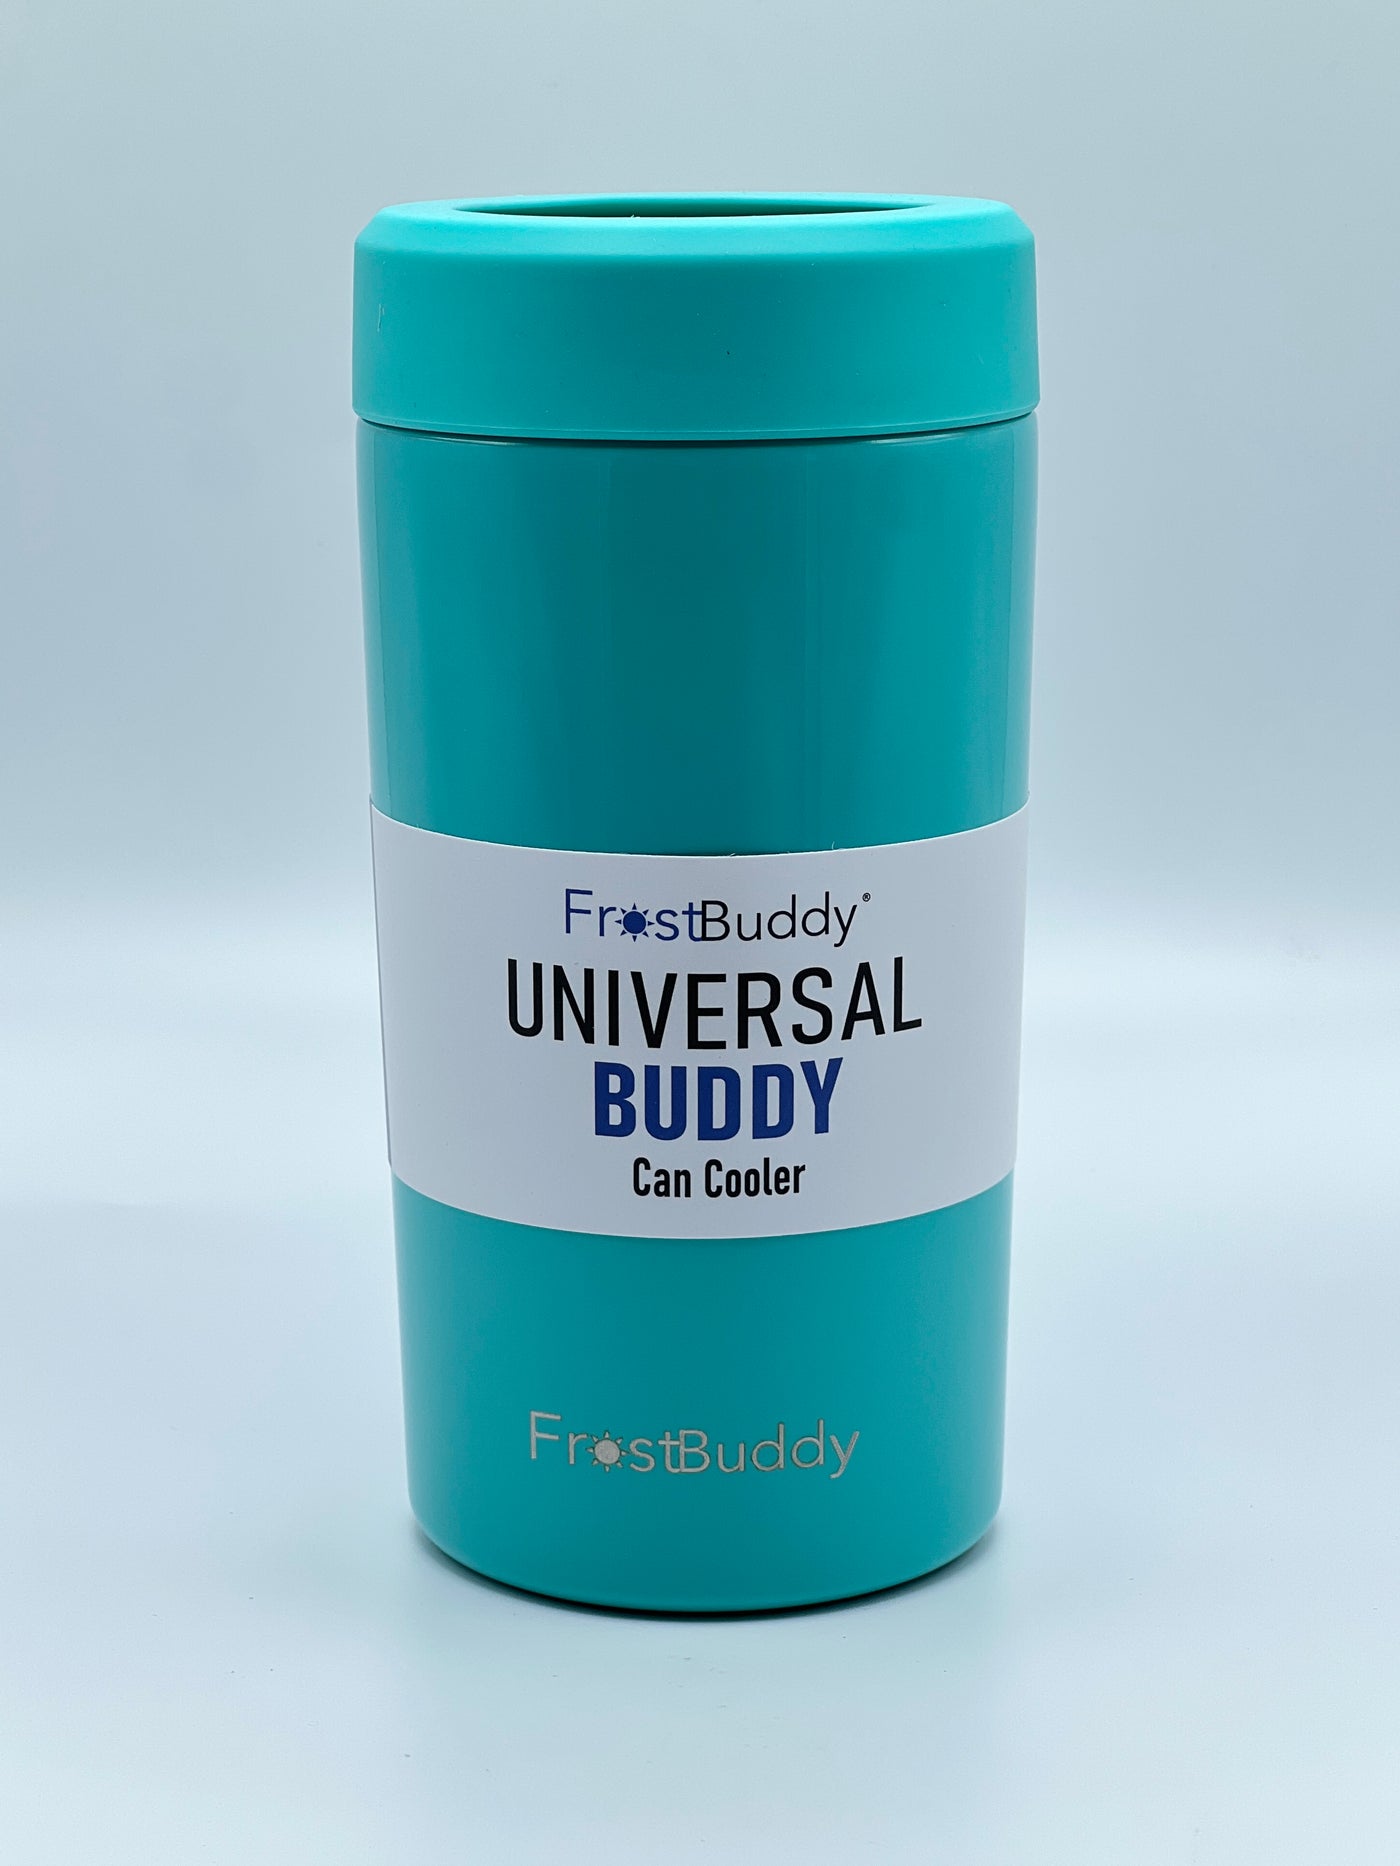 Rare frost buddy can cooler